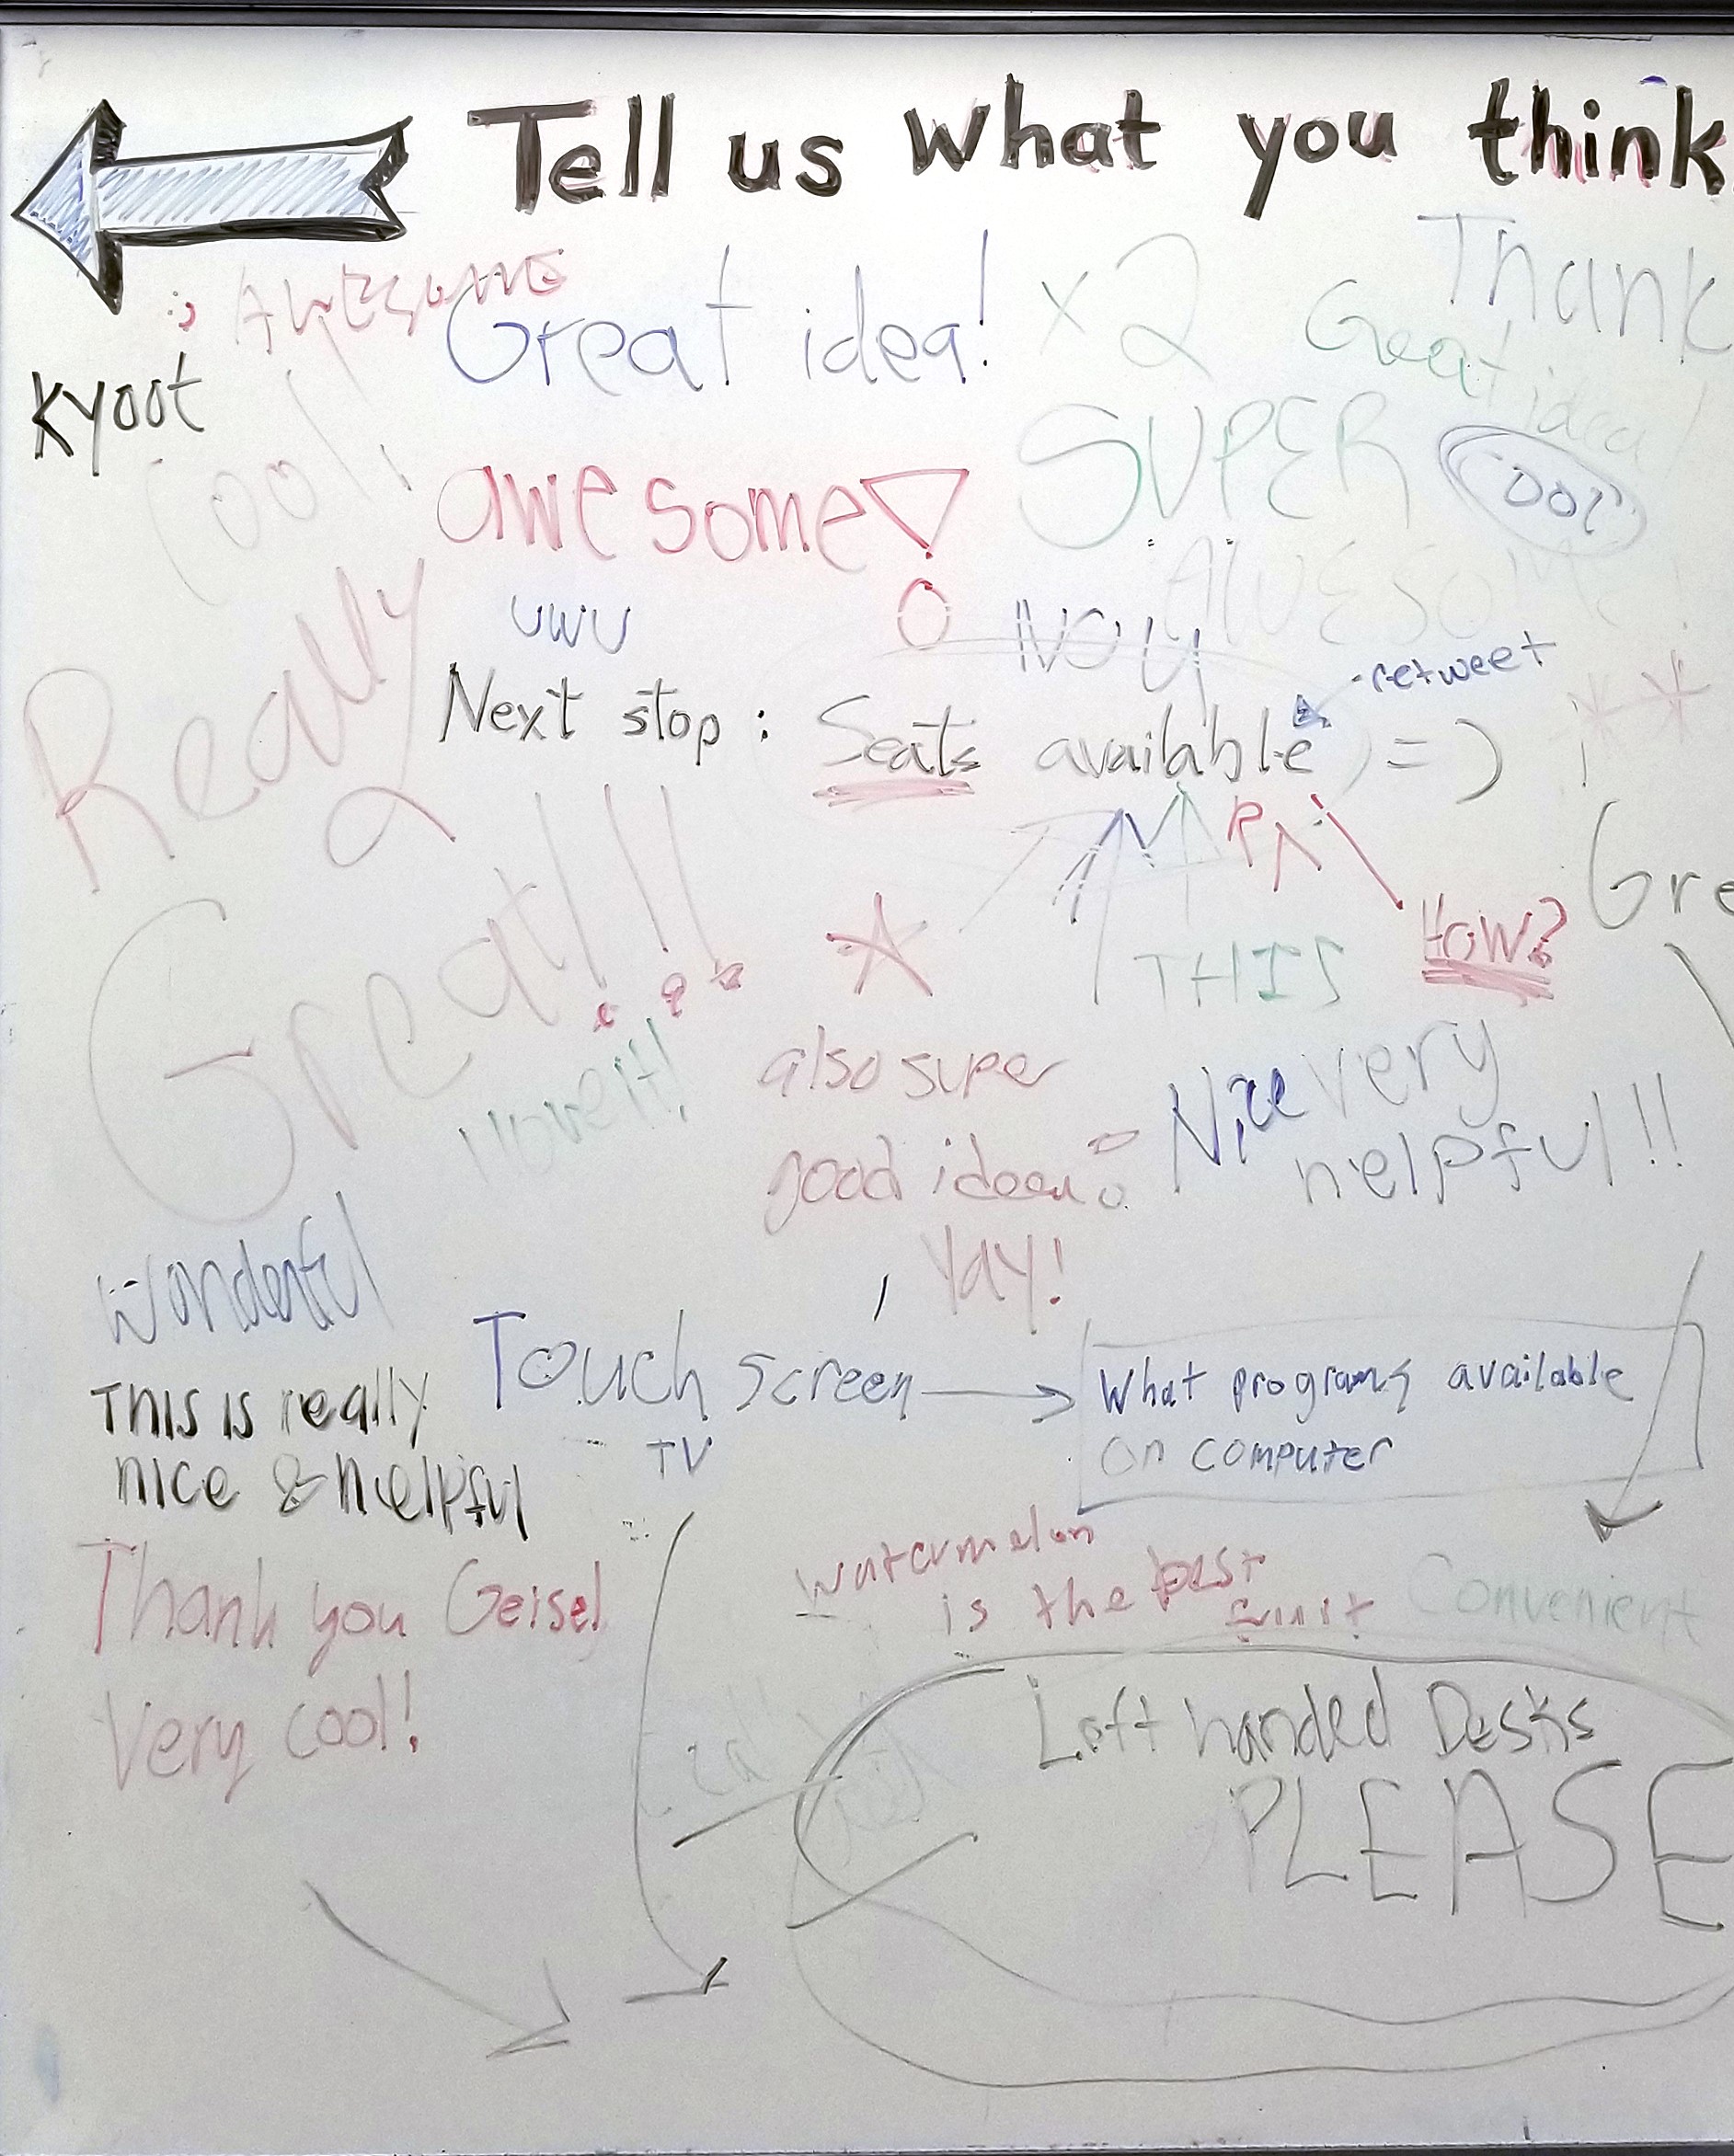 students' written suggestions on a whiteboard